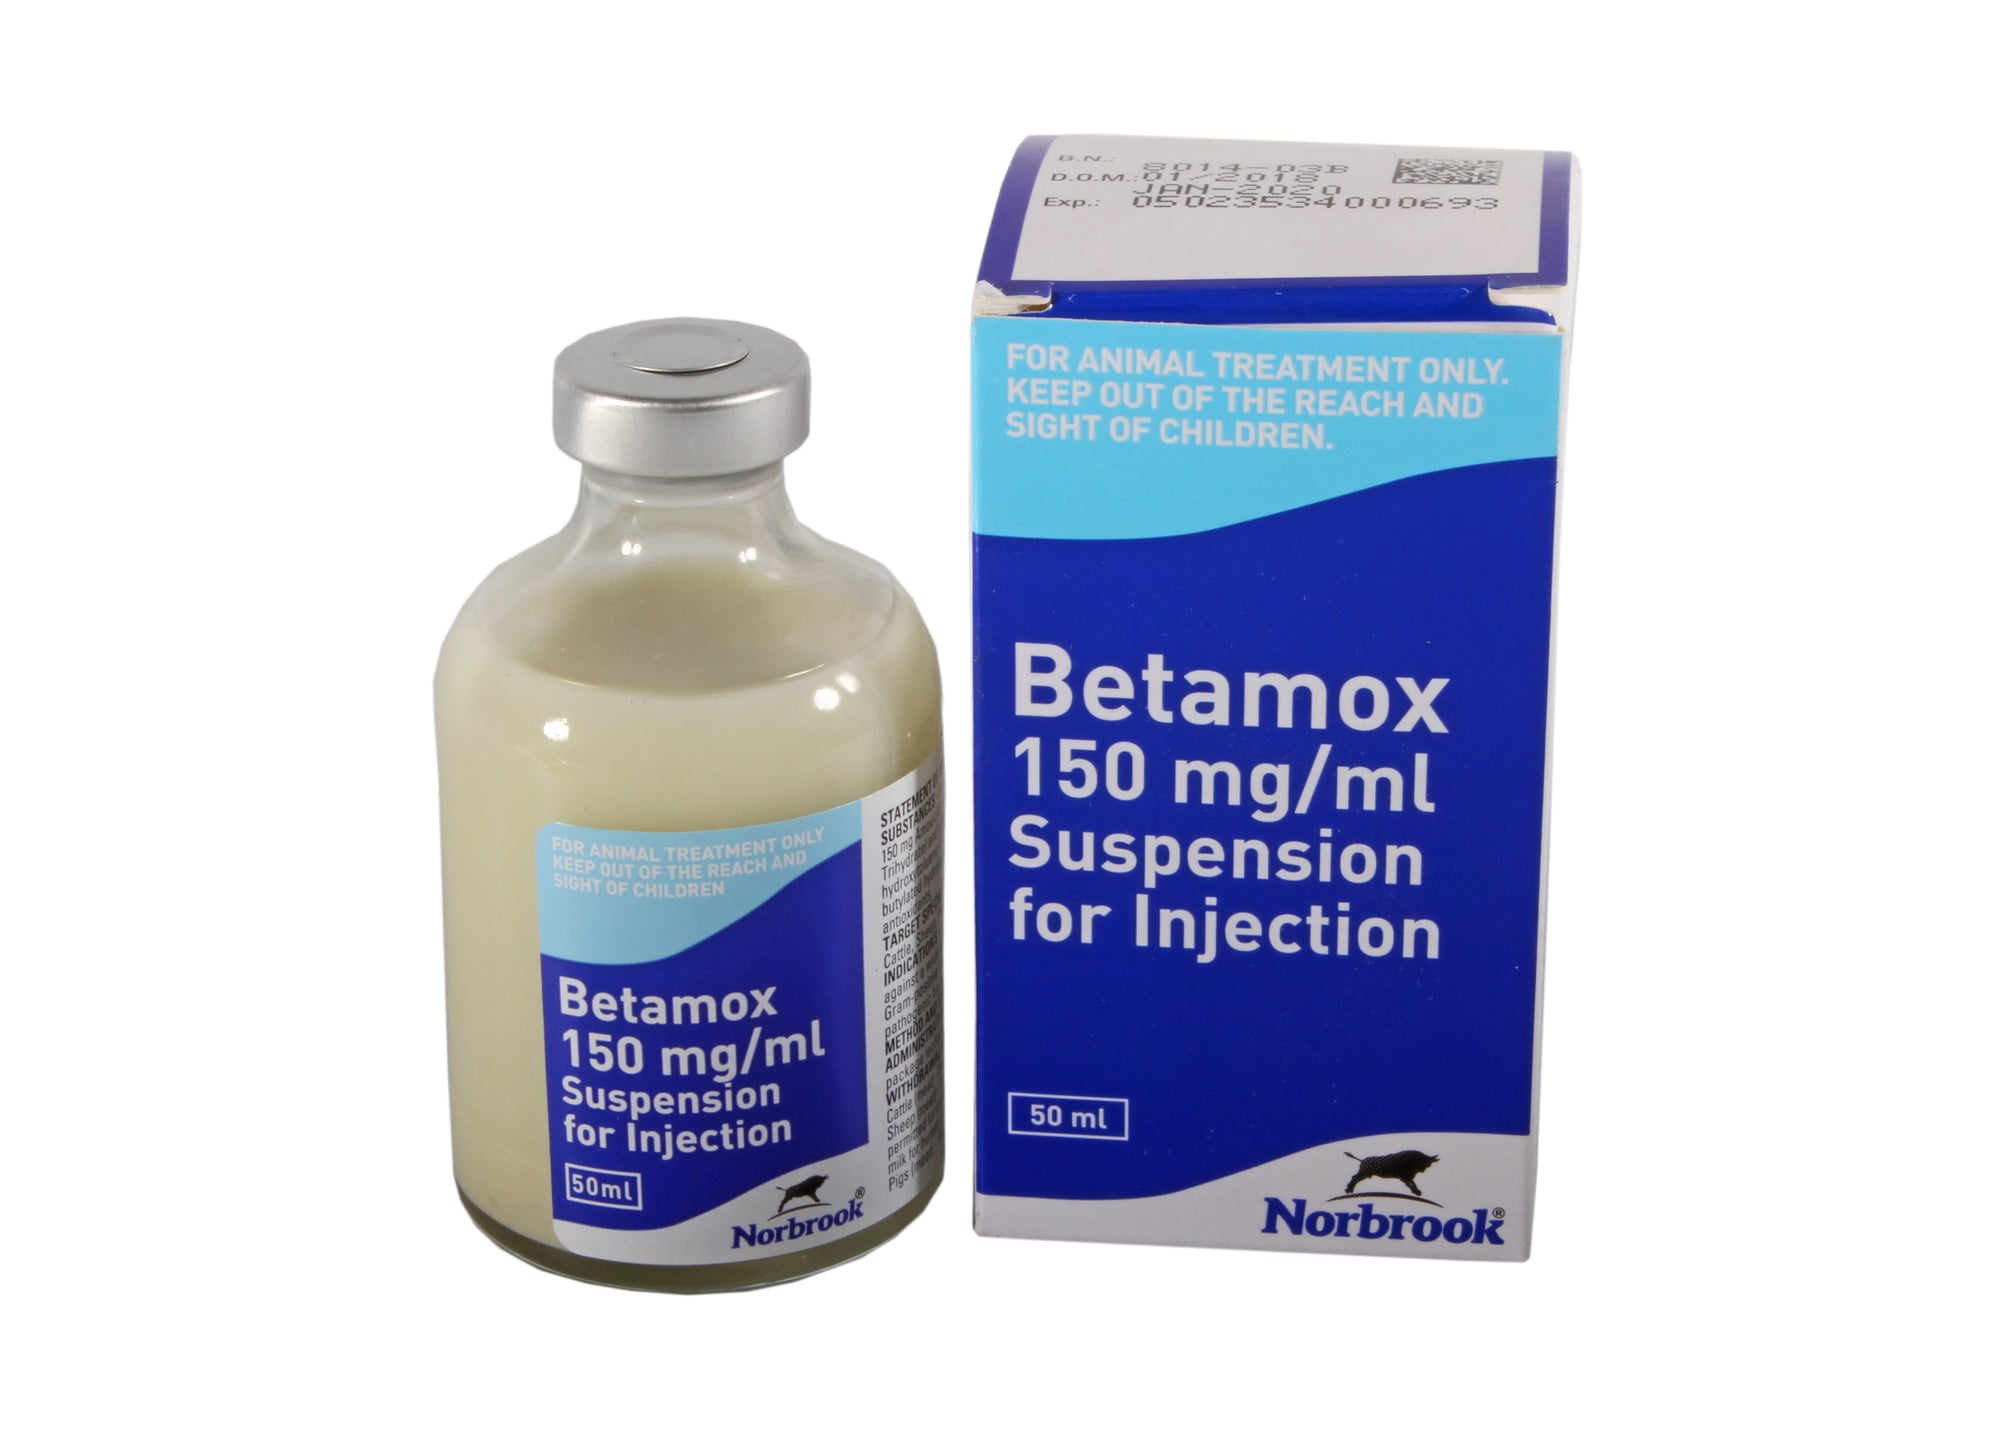 Betamox 150 mg/ml Suspension for Injection